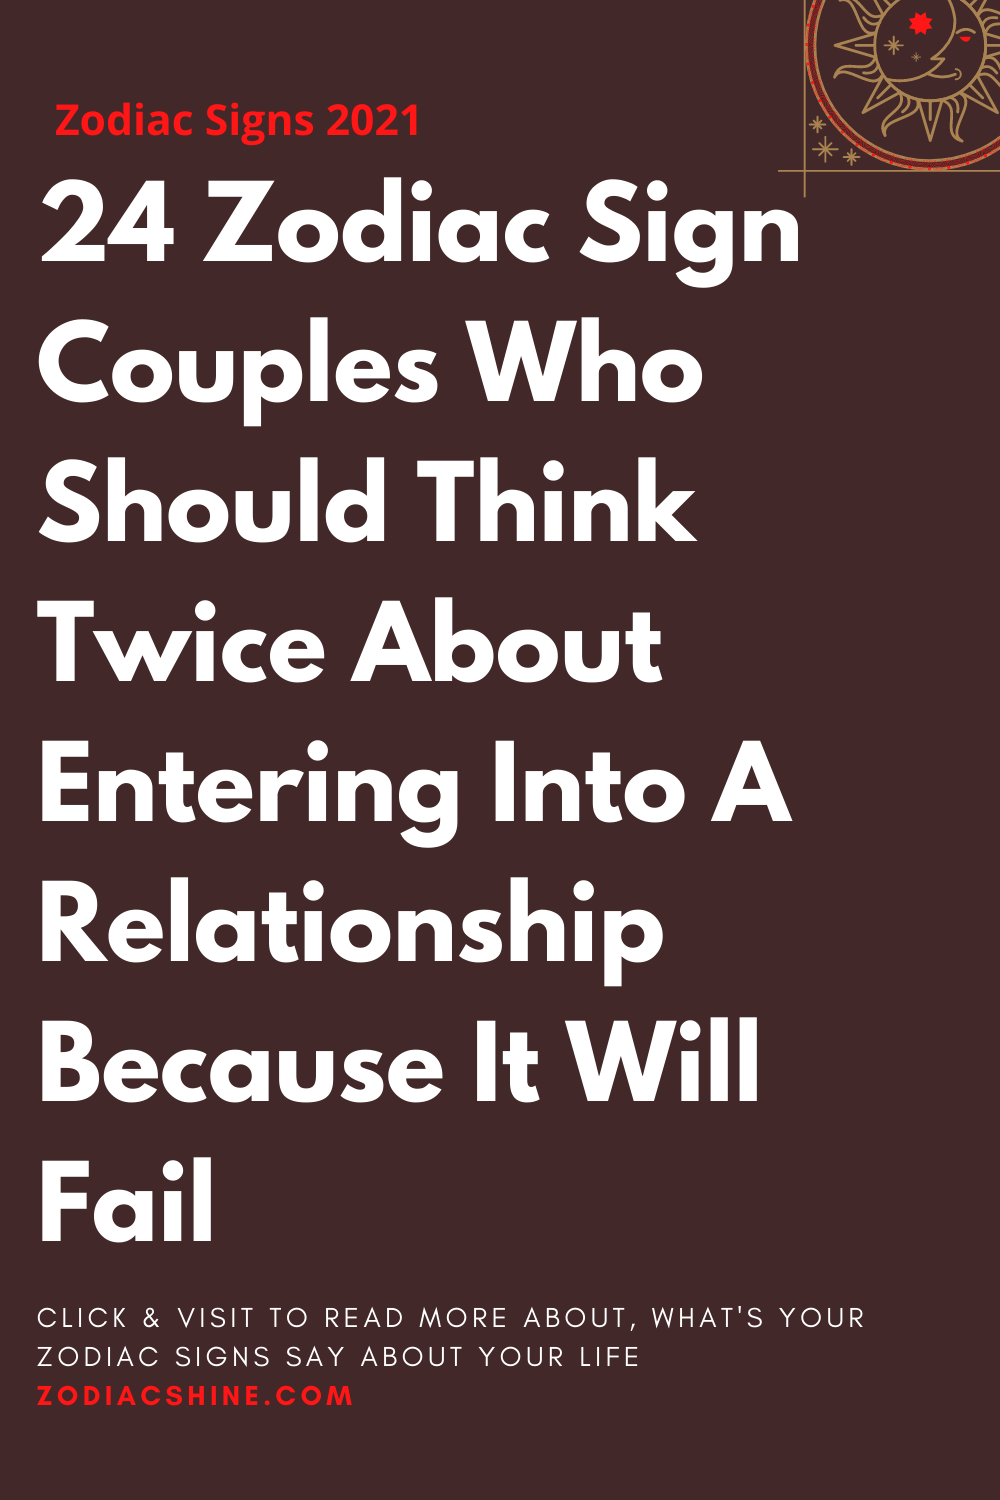 24 Zodiac Sign Couples Who Should Think Twice About Entering Into A Relationship Because It Will Fail